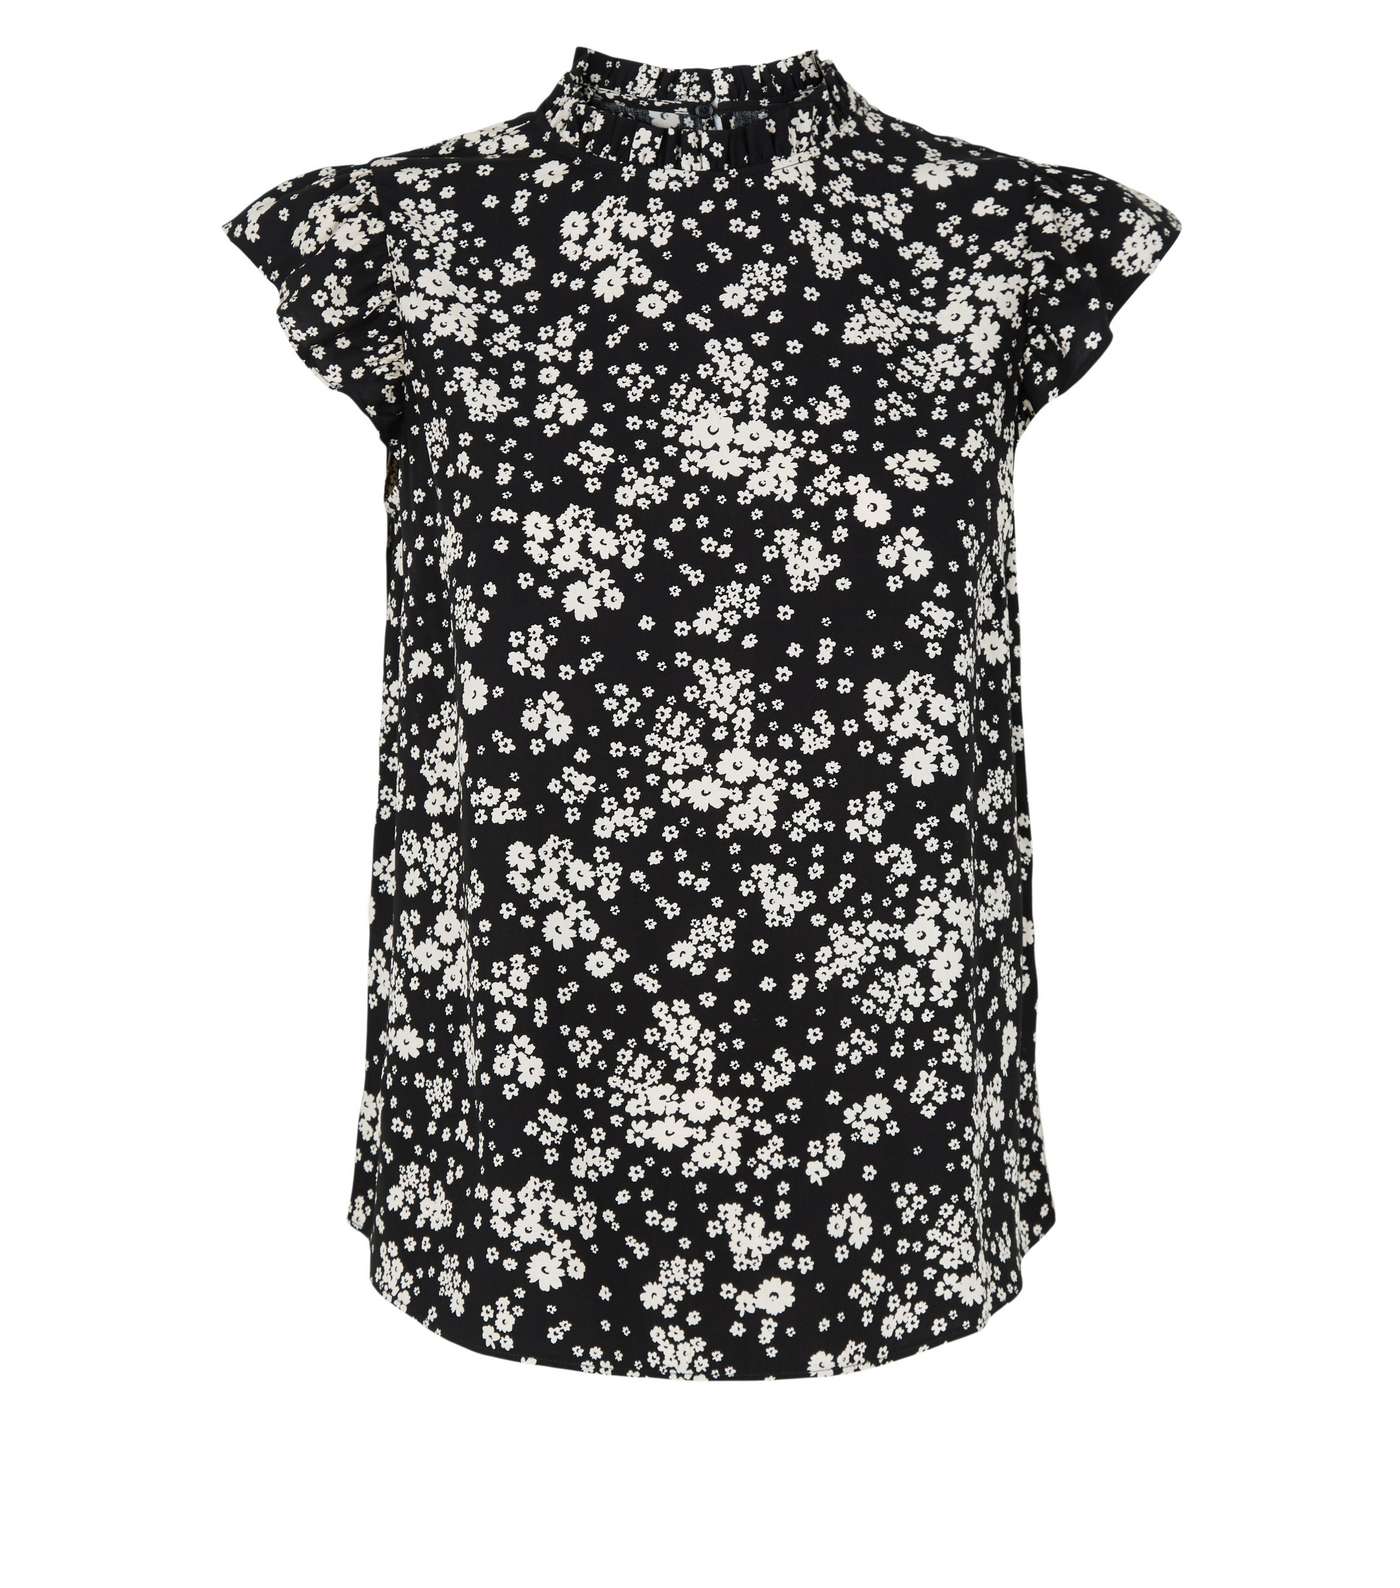 Petite Black Ditsy Floral High Neck Frill Top Image 4